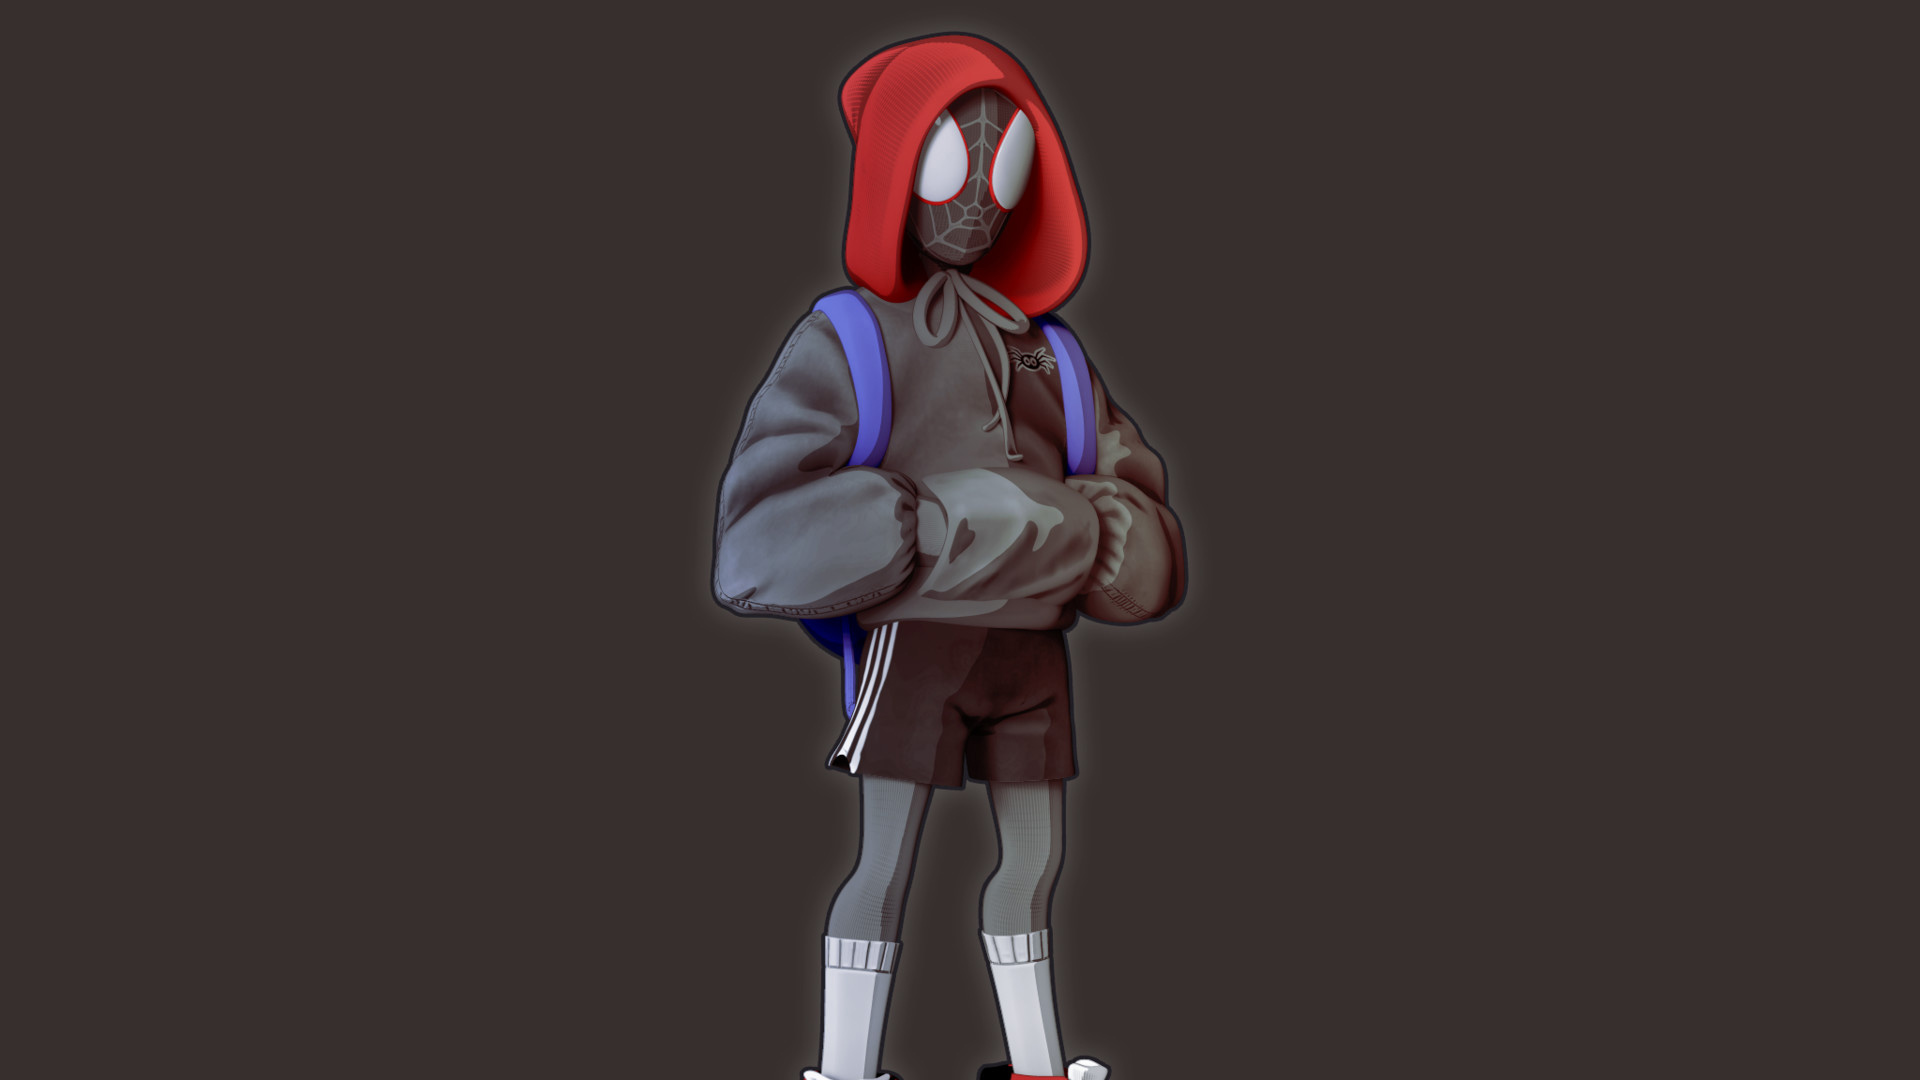 Spiderman Hoodie Guy A1 - Spider-man , HD Wallpaper & Backgrounds